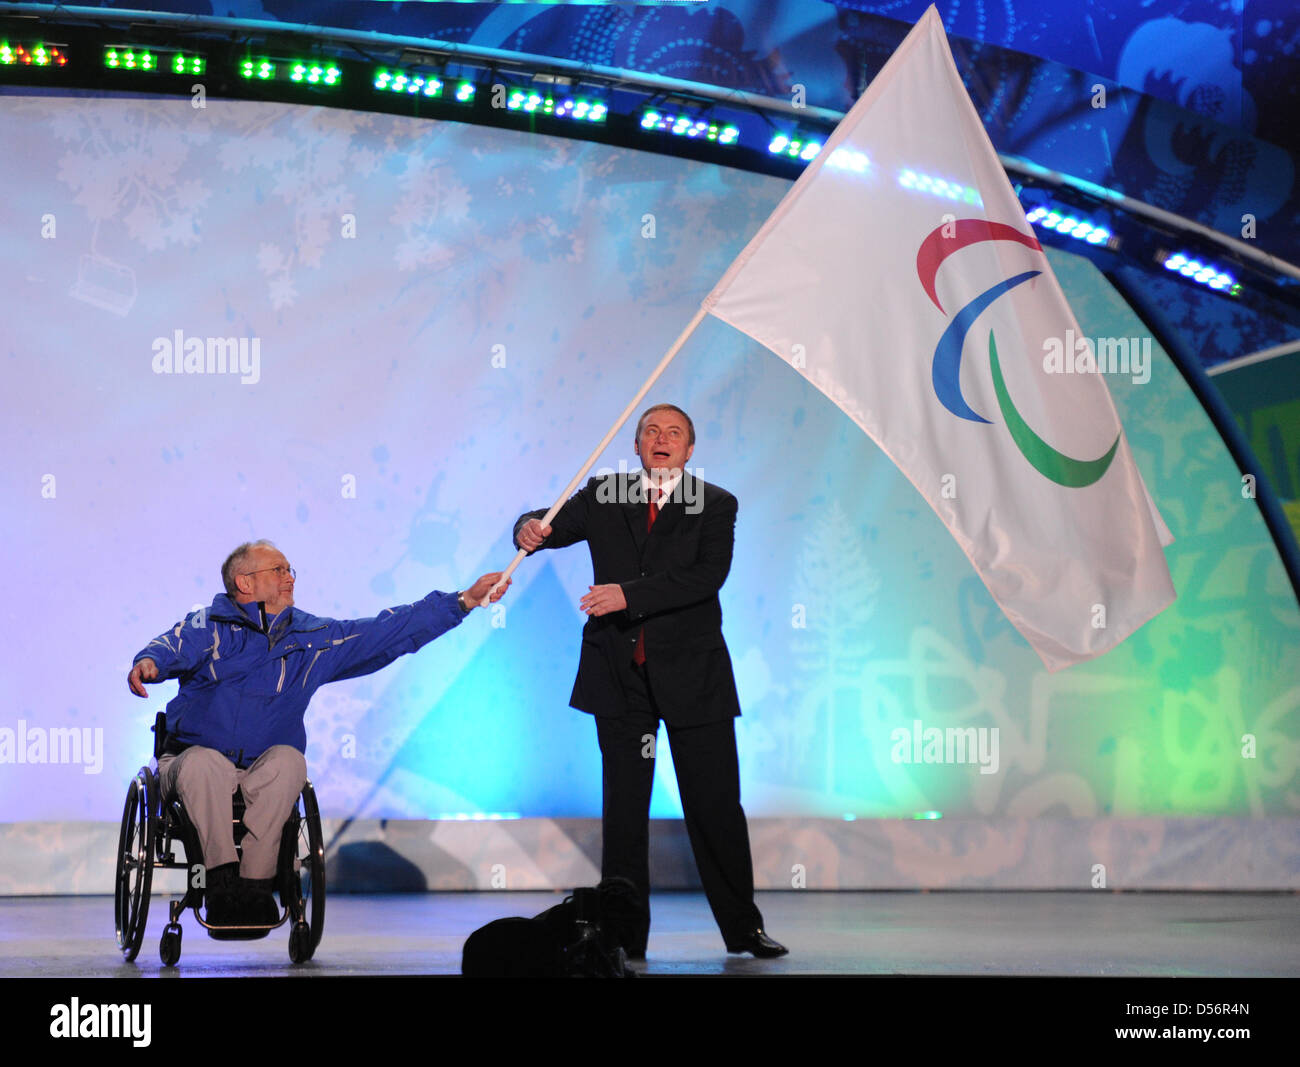 Philip Craven (L), President of the International Paralympic Committee, hands over the Paralympic flag to Sochi Mayor Anatoly Pakhomov during the Closing Cermony of the Paralympics 2010 in Whistler, Canada, 21 March 2010. The next Paralympic Winter Games take place in Sochi, Russia from 07 to 16 March 2014. Photo: Julian Stratenschulte Stock Photo